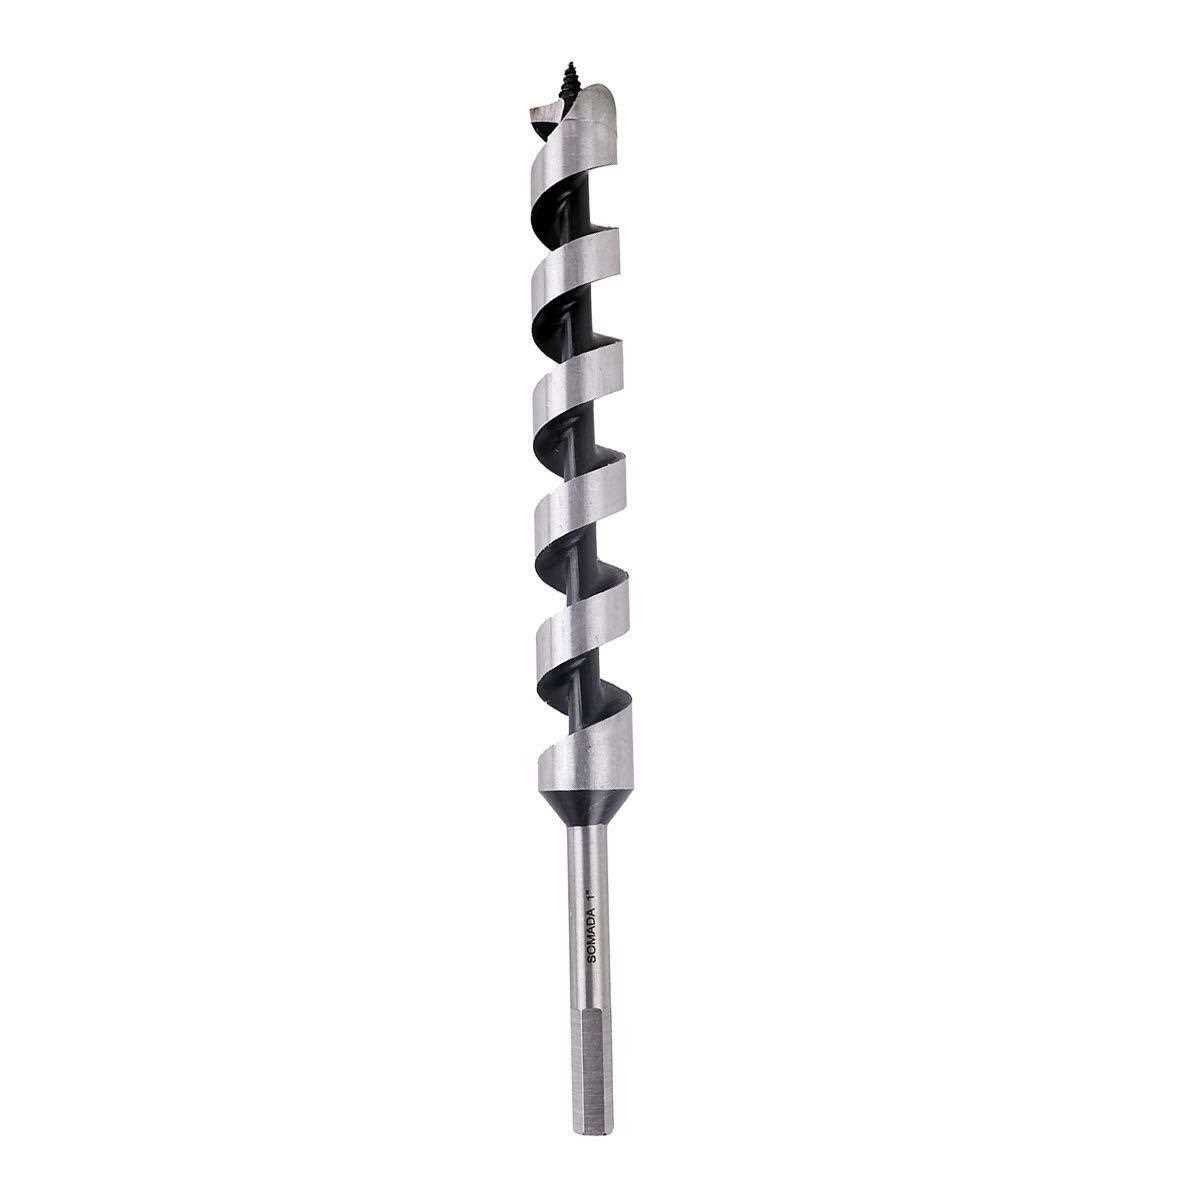 Safety Guidelines for Auger Drill Bit Usage